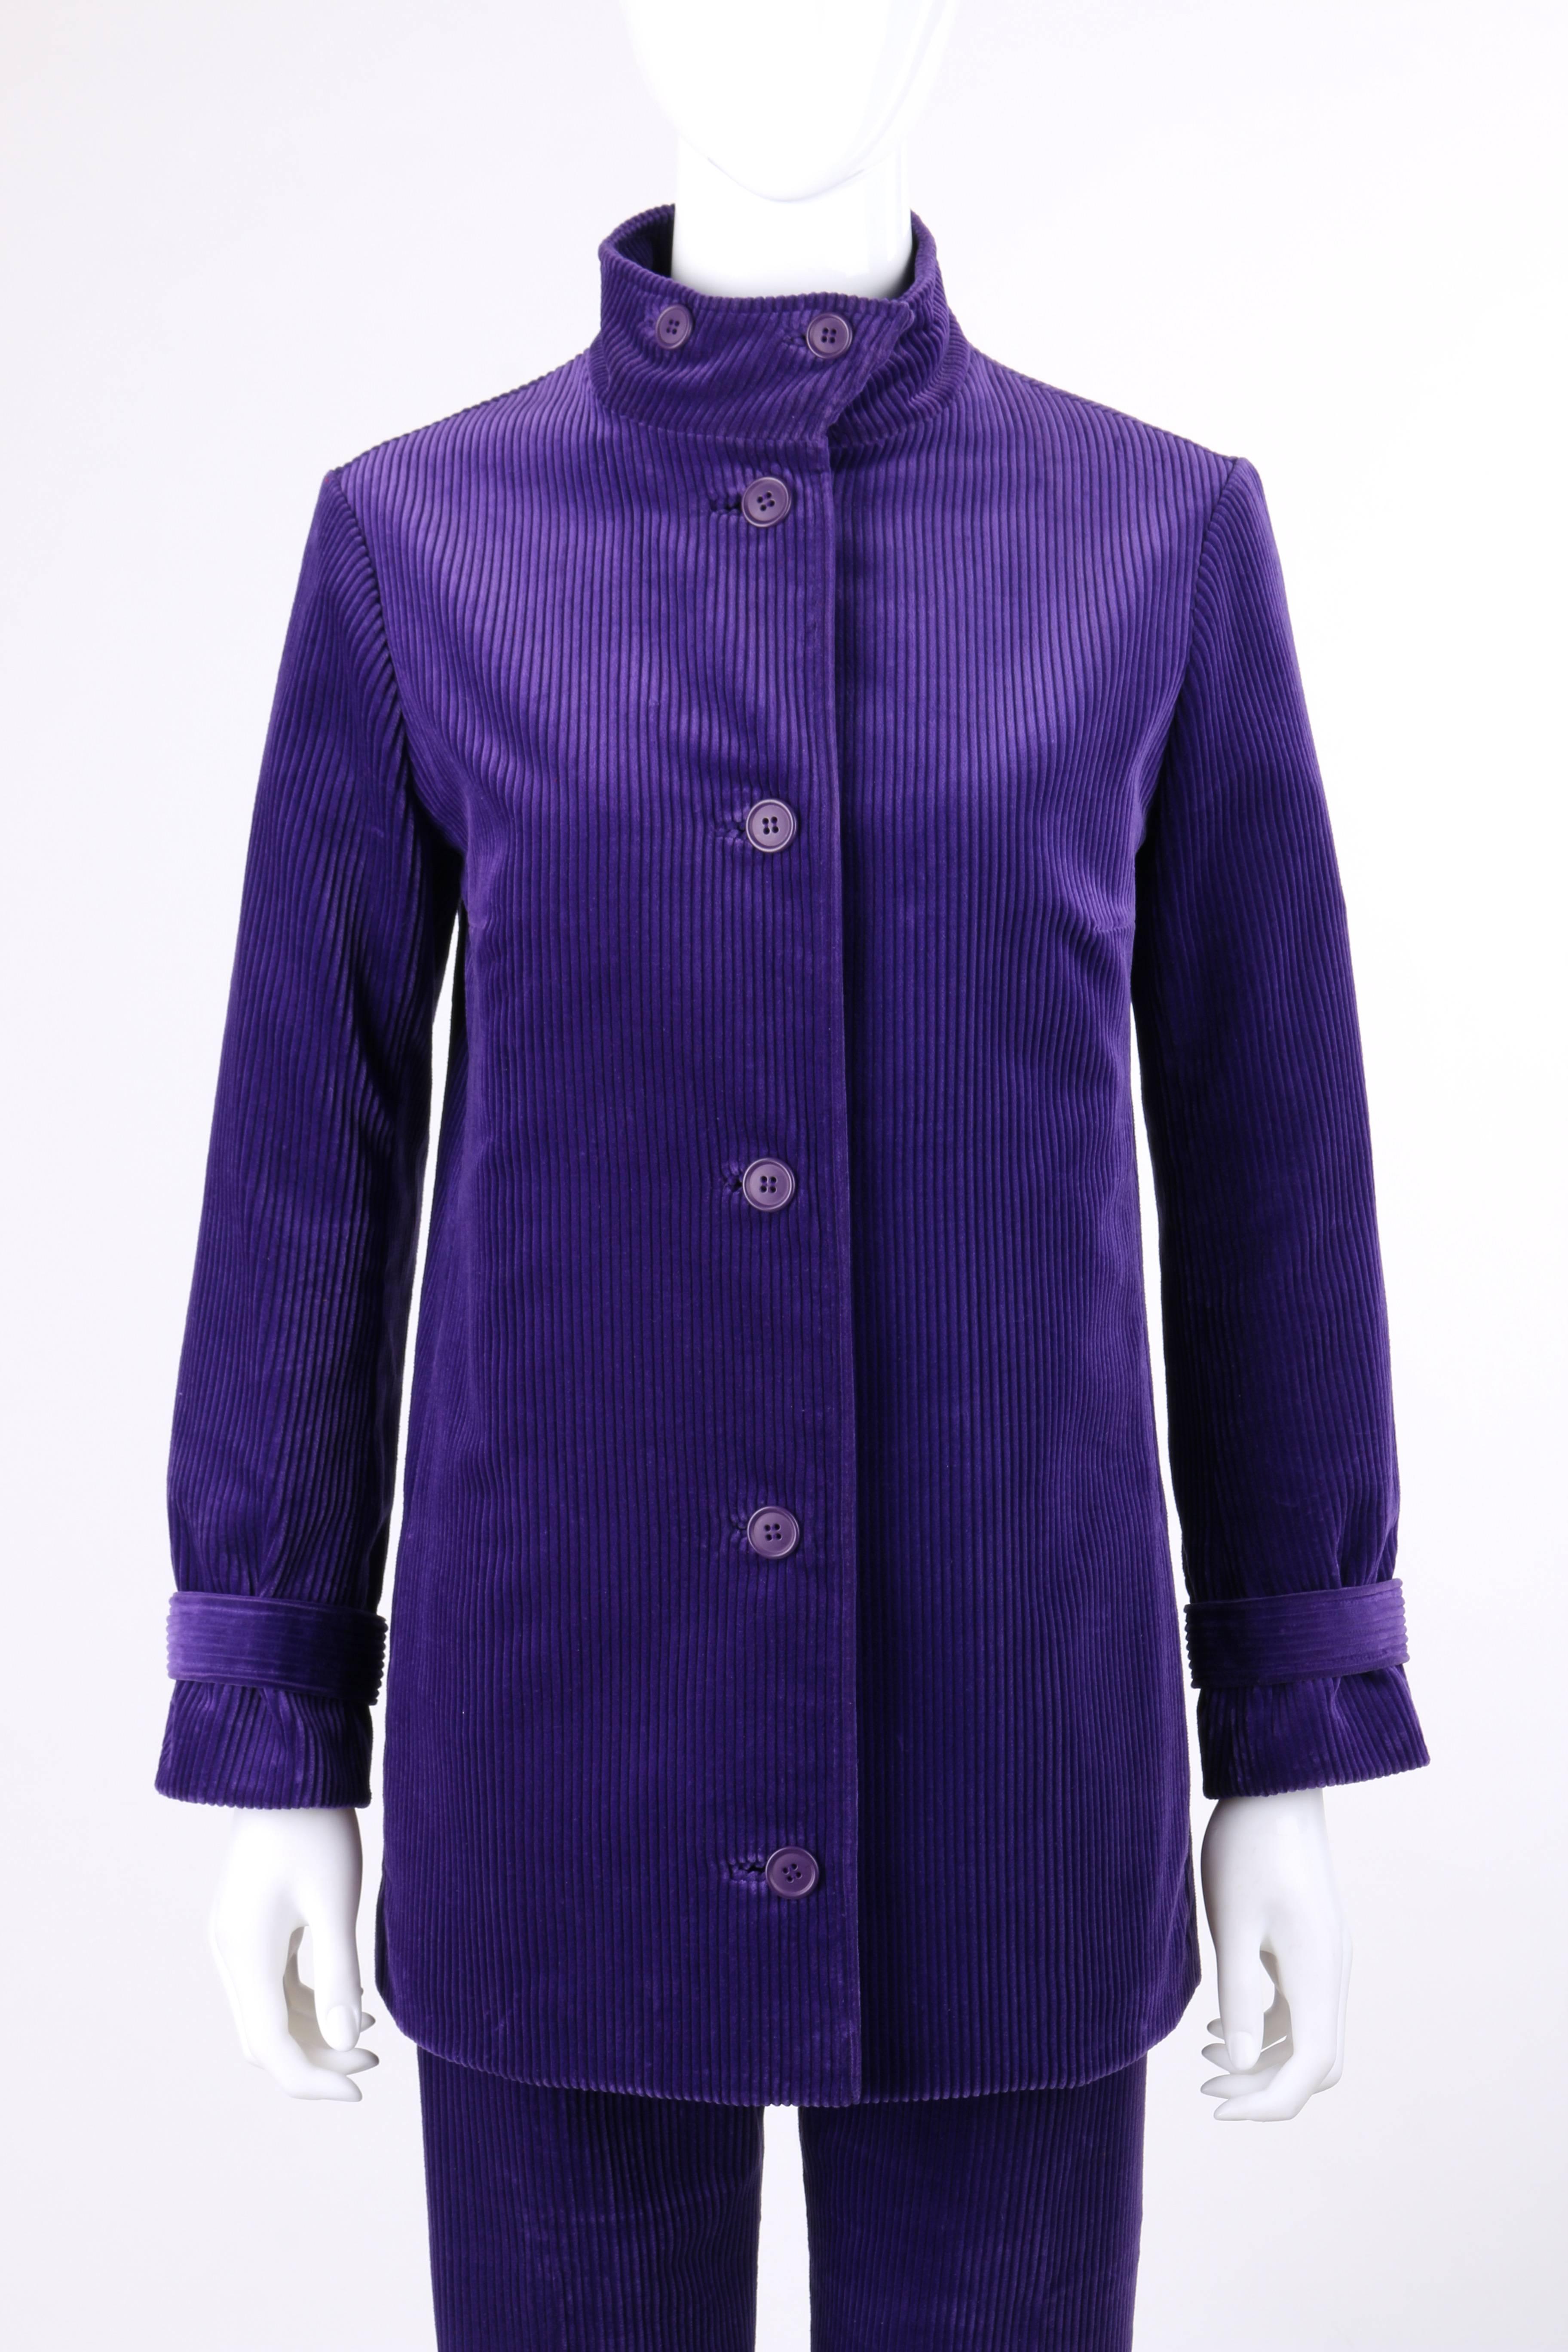 Vintage Designed by Jax c.1960's two piece purple corduroy jacket tapered pants suit set. Mandarin collar jacket with two button closures at front. Five center front button closures. Long sleeves with sleeve strap and single button closure at cuff.